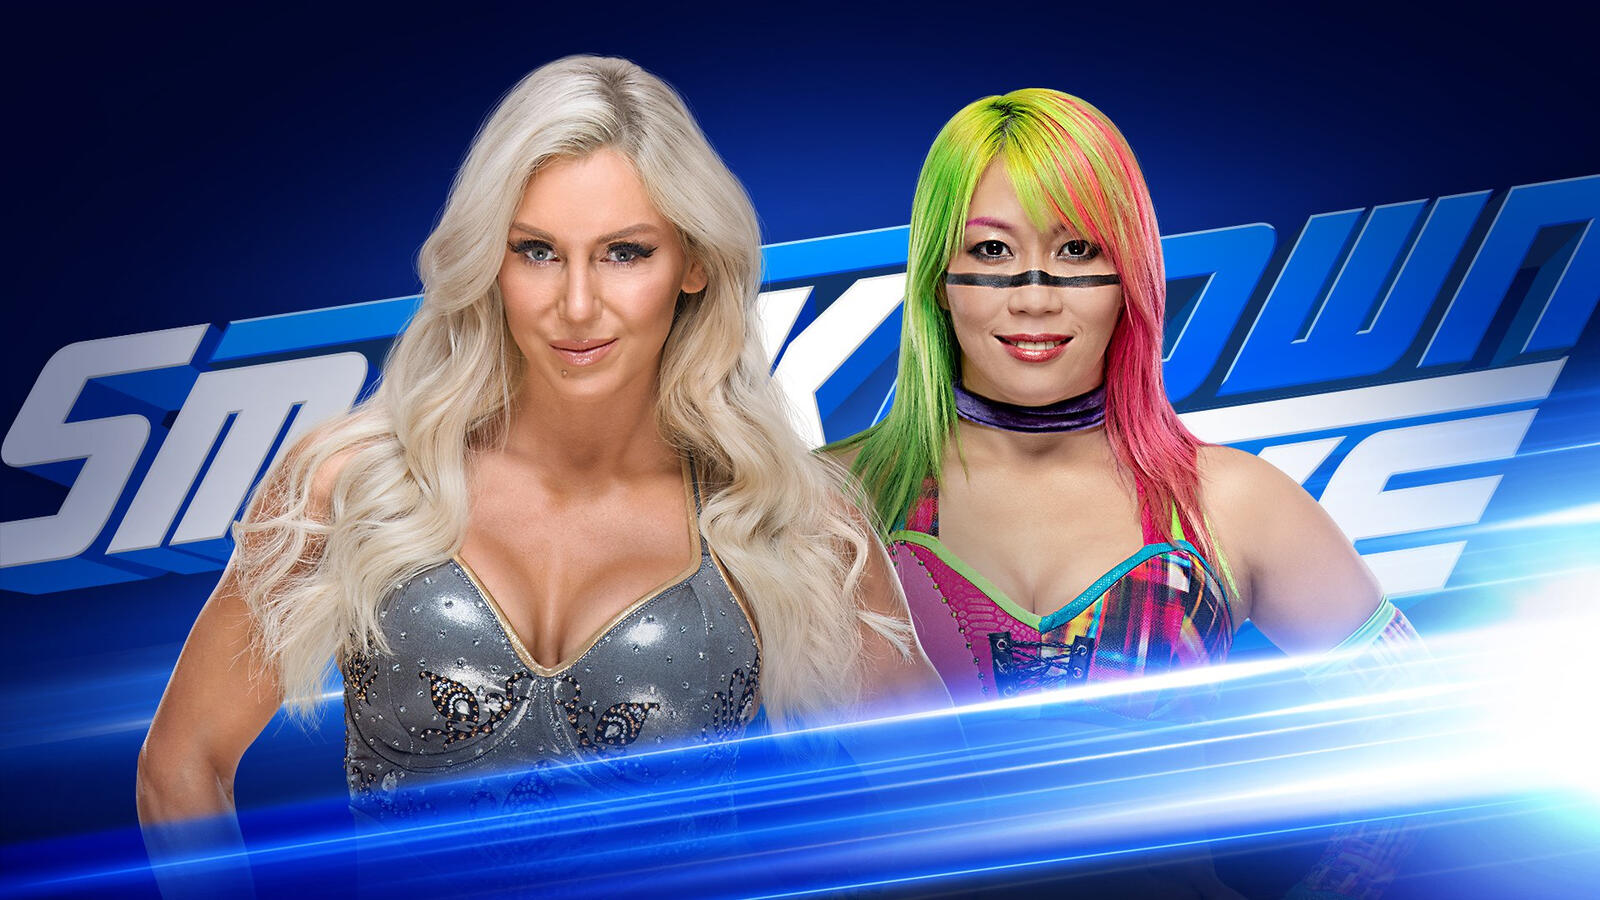 WWE SmackDown Live Charlotte Flair and Asuka clash in WrestleMania